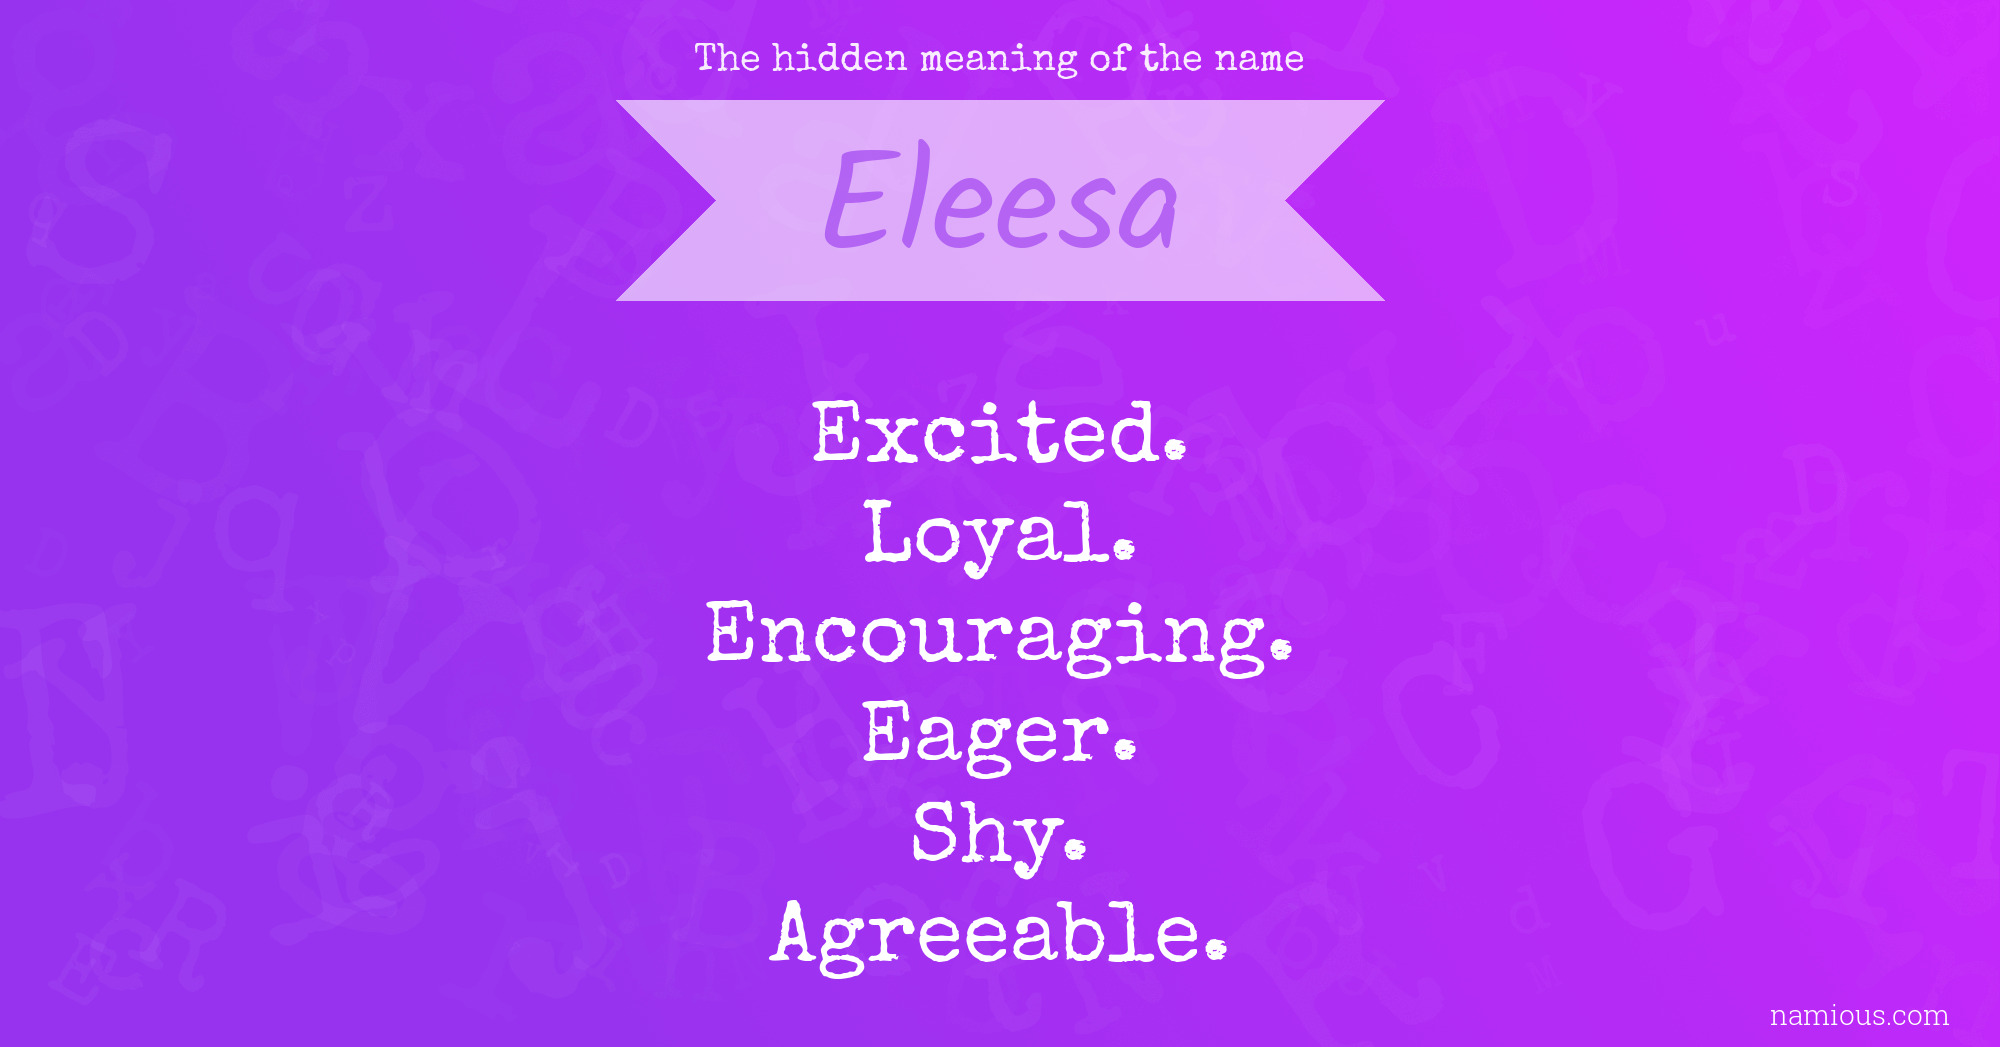 The hidden meaning of the name Eleesa